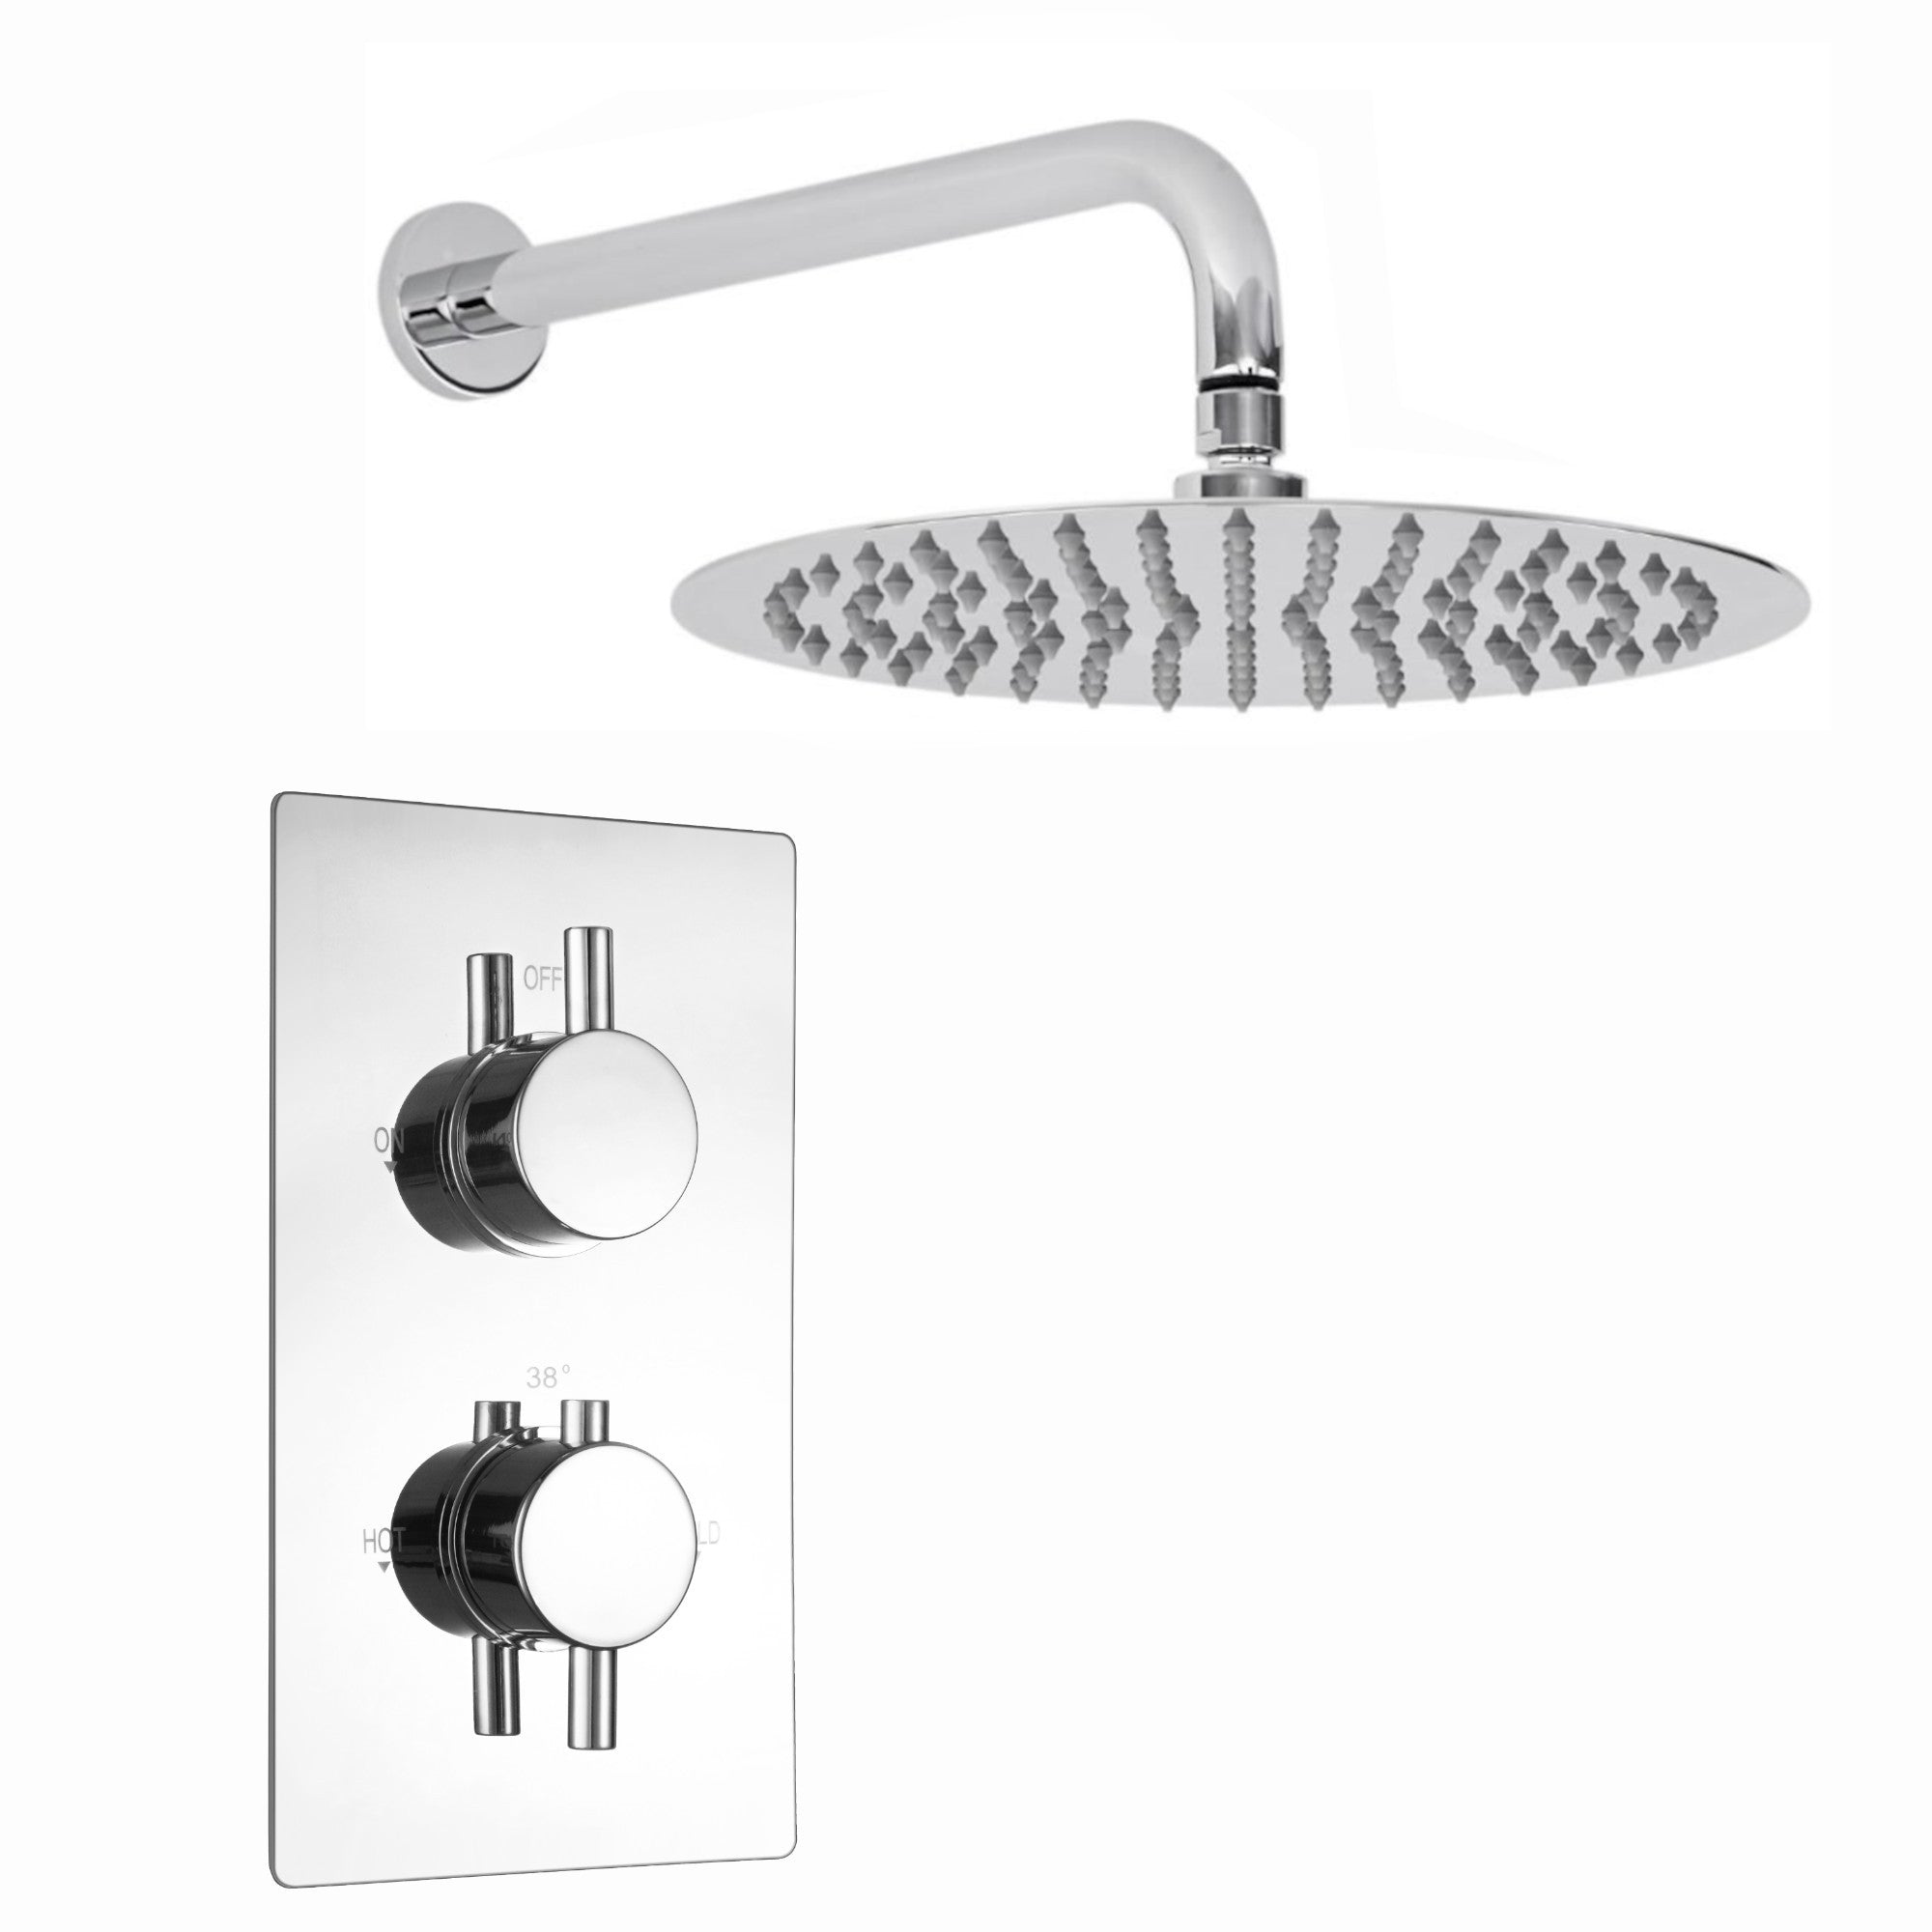 Venice Contemporary Round Concealed Thermostatic Shower Set Wall Fixed 8" Shower Head - Chrome (1 Outlet)